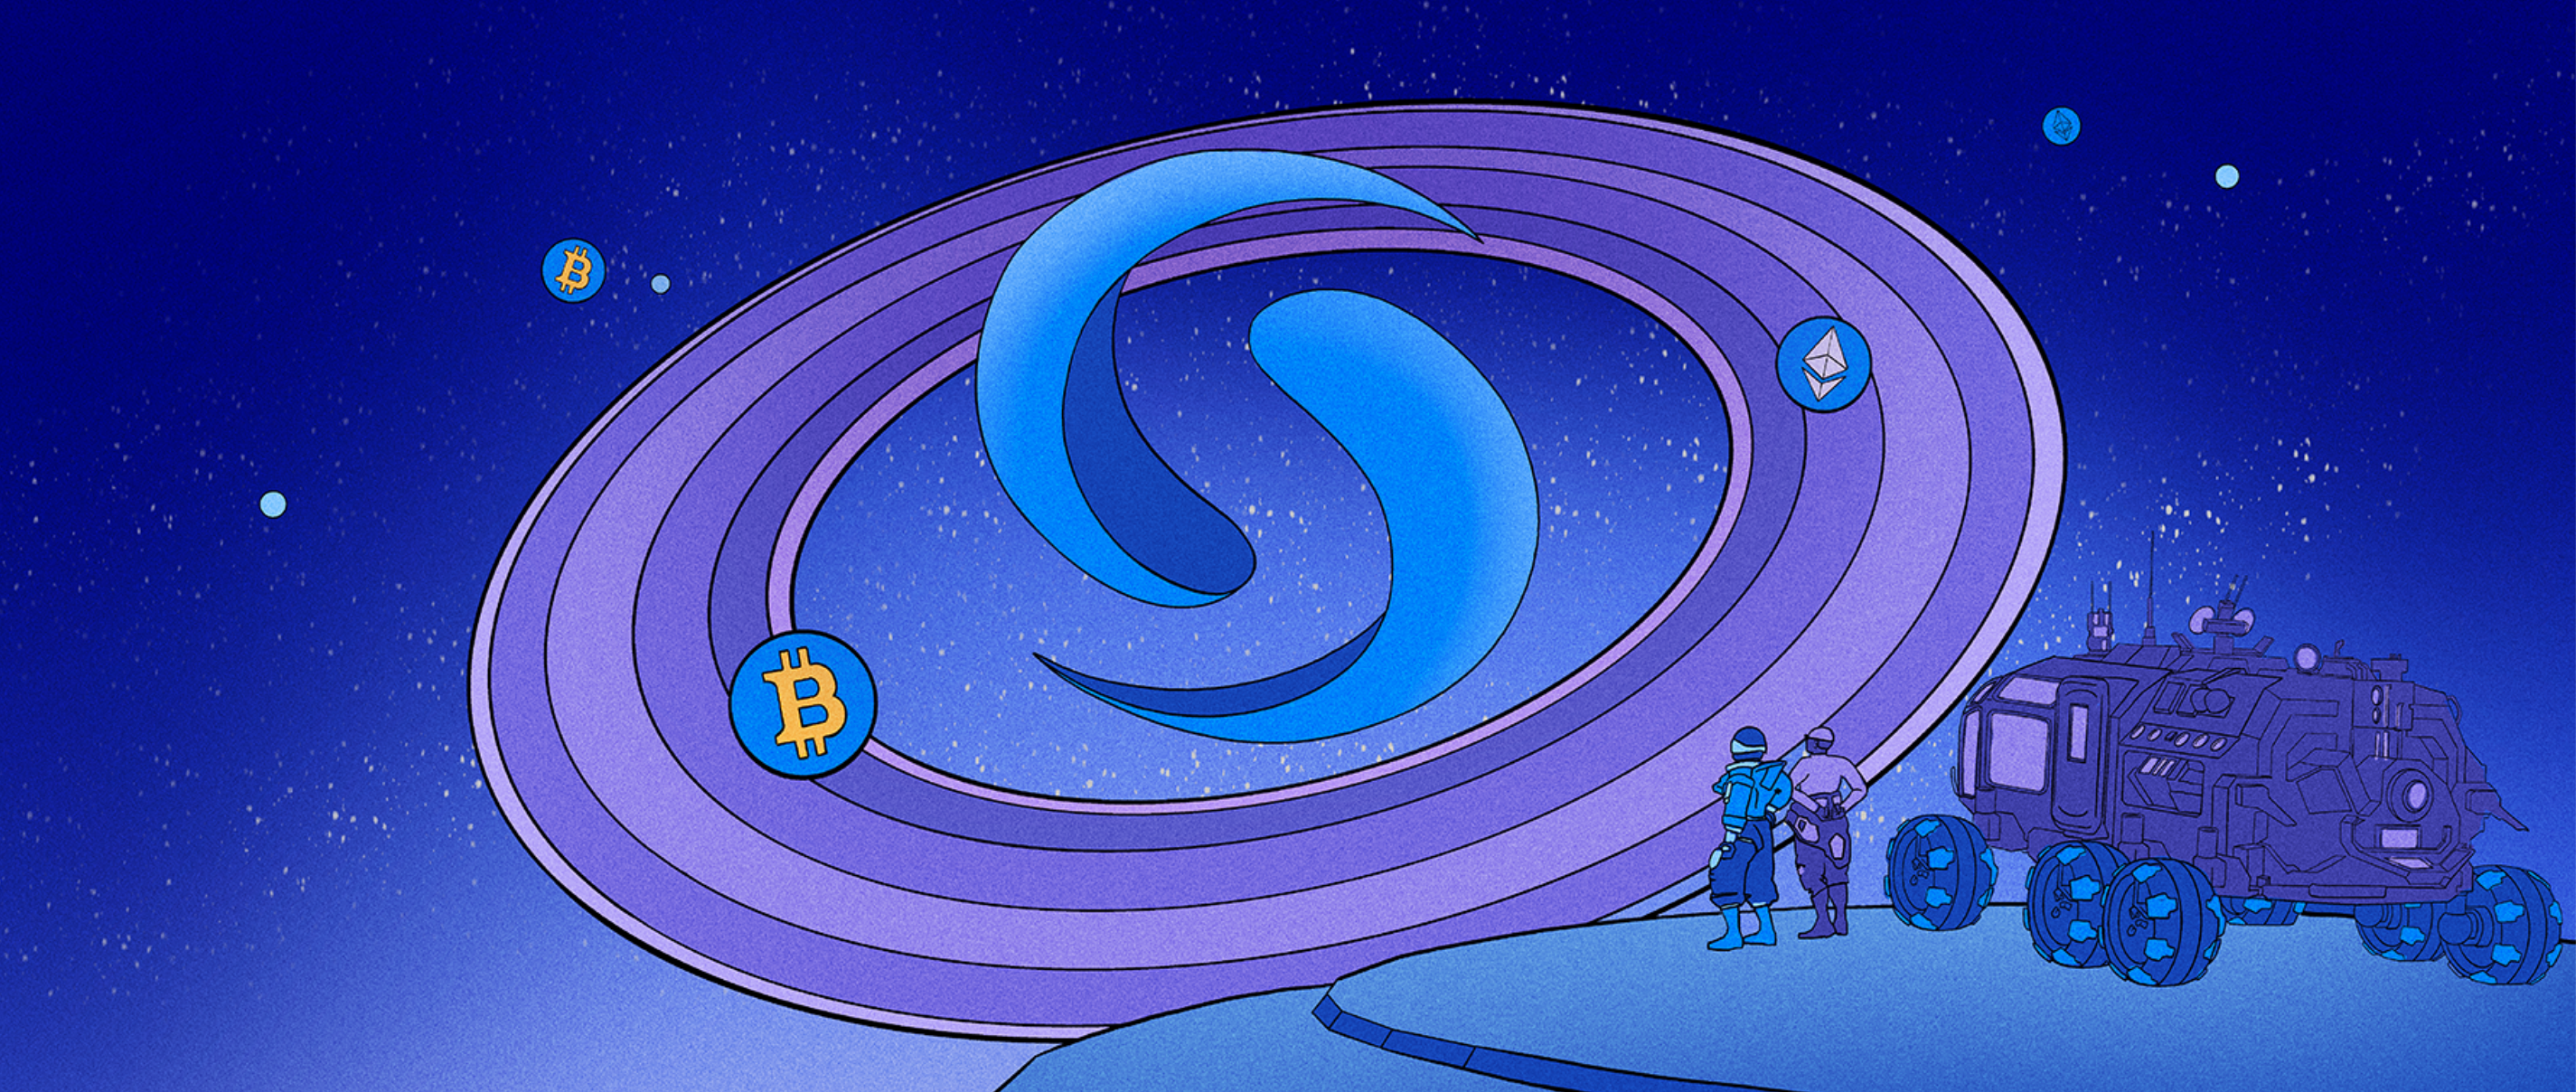 Syscoin (SYS) guide banner image.